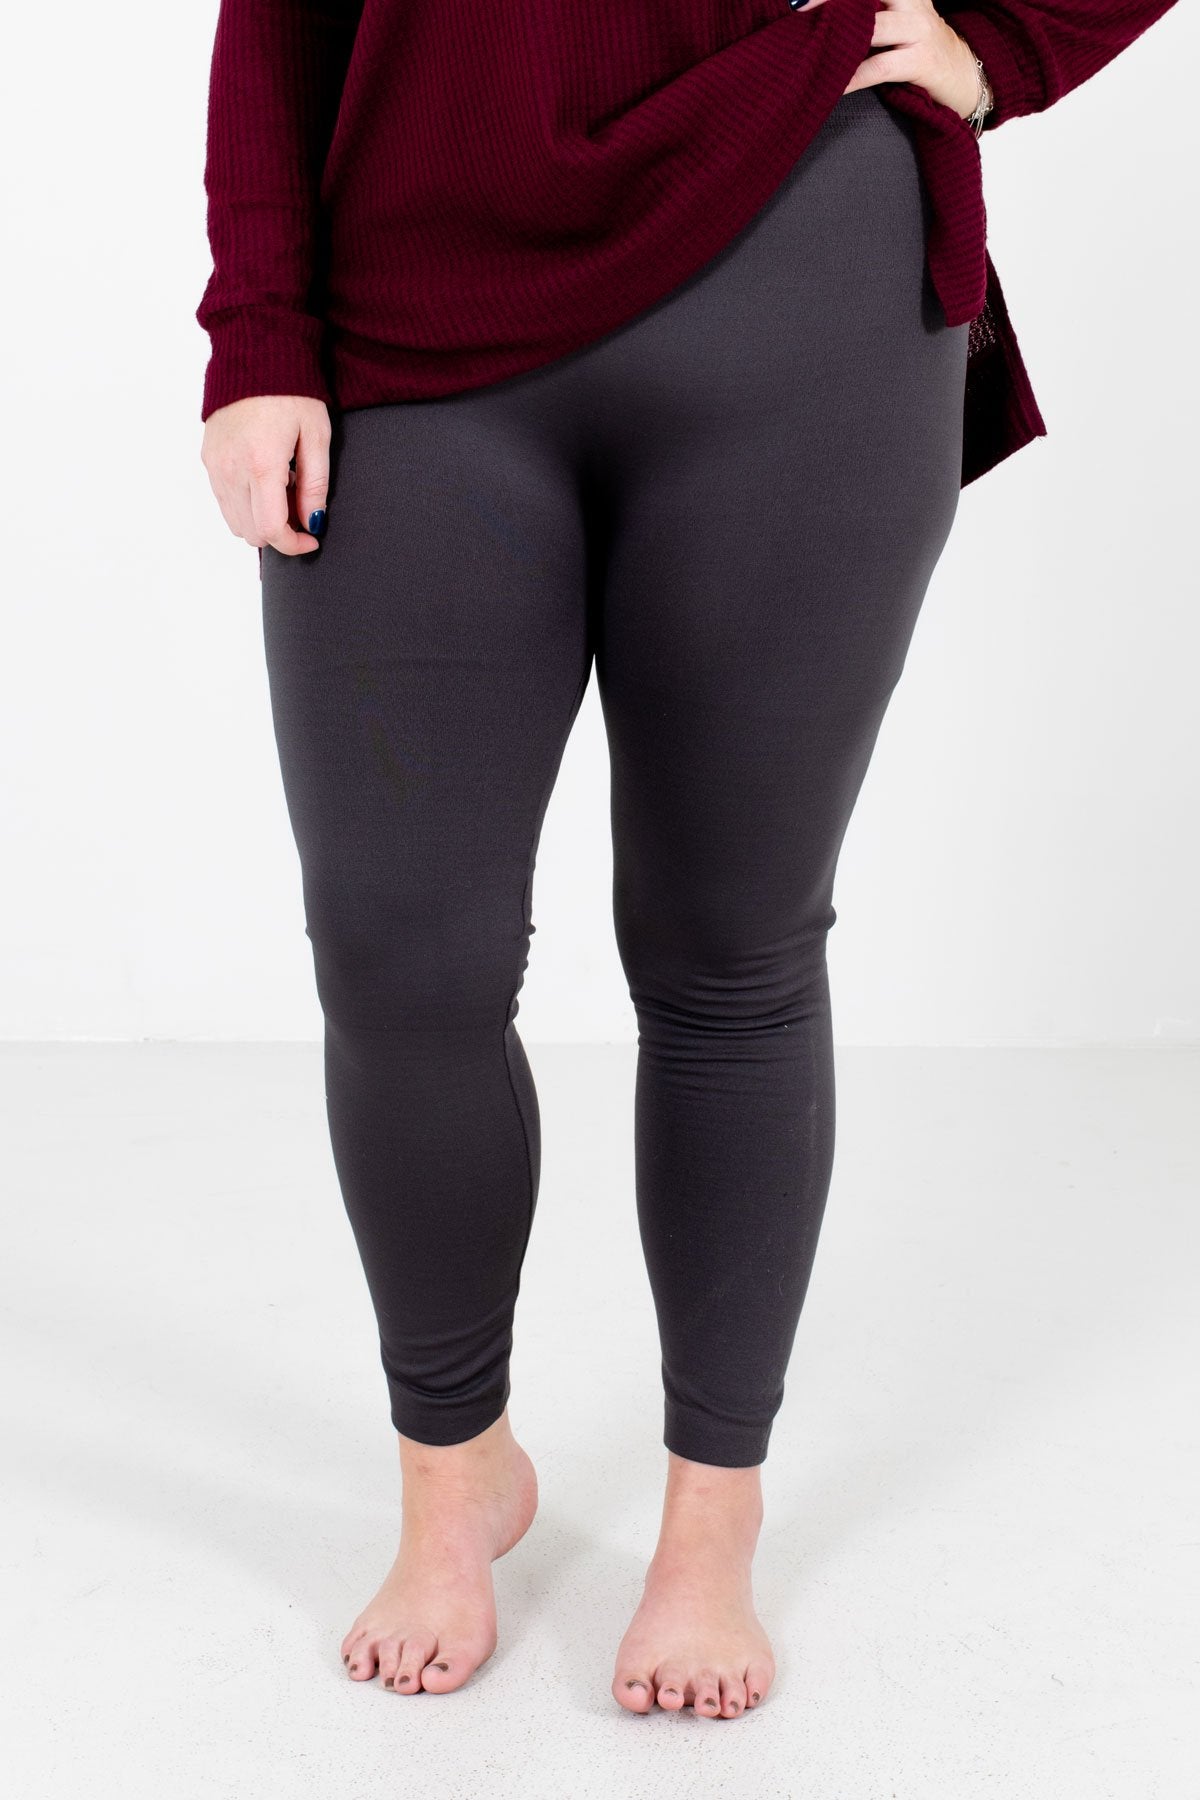 Women's Gray Warm and Cozy Boutique Leggings